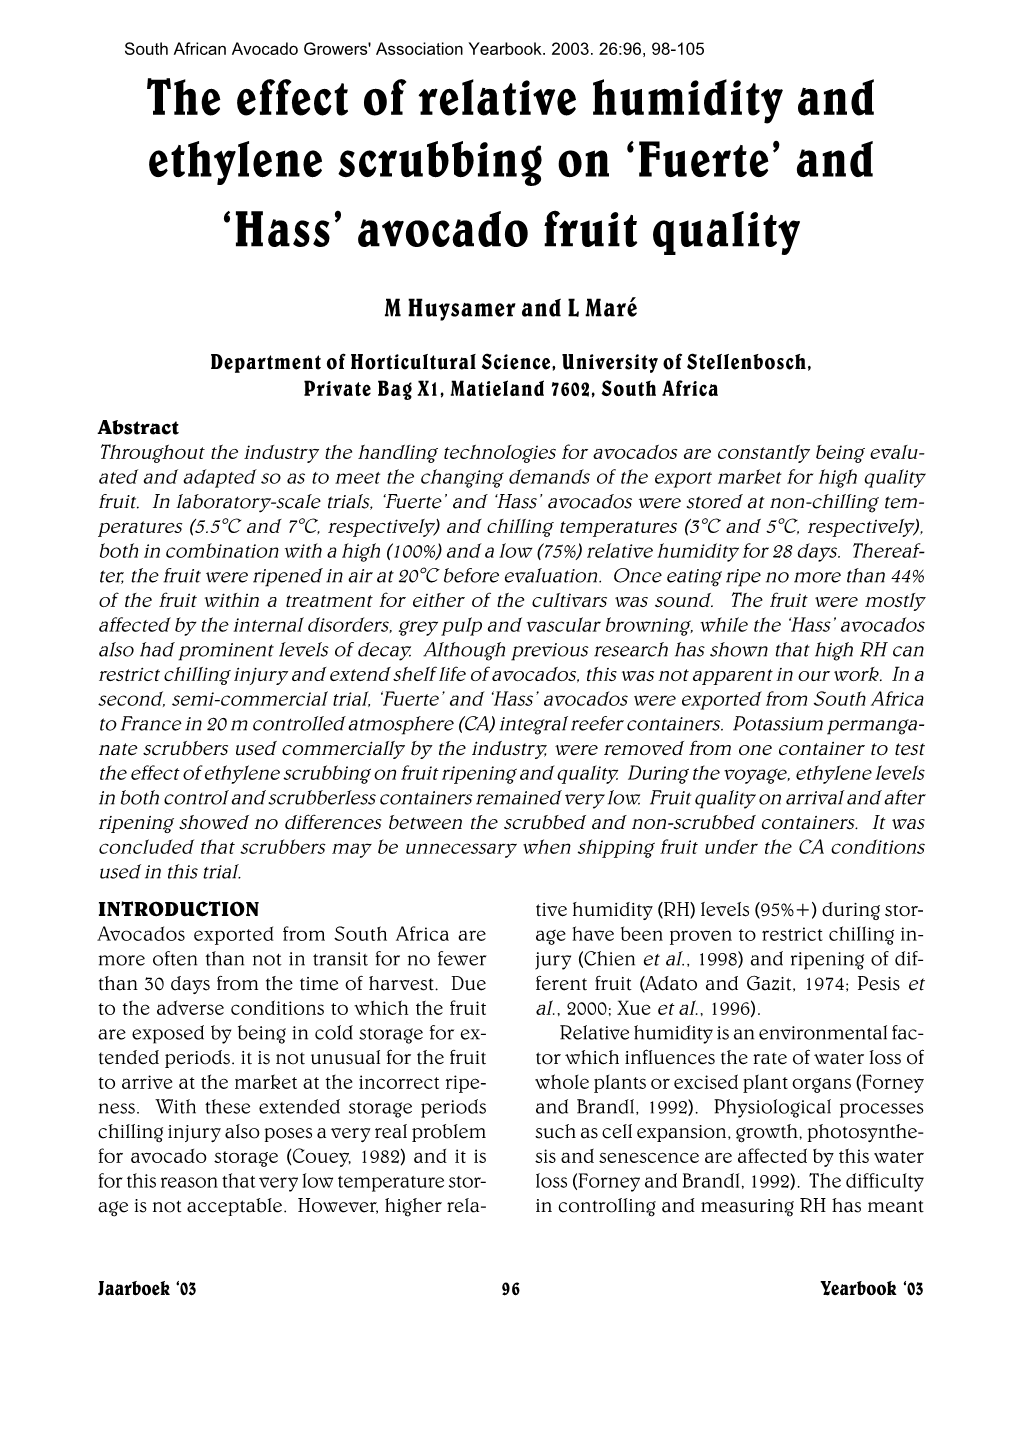 The Effect of Relative Humidity and Ethylene Scrubbing on 'Fuerte' and 'Hass' Avocado Fruit Quality